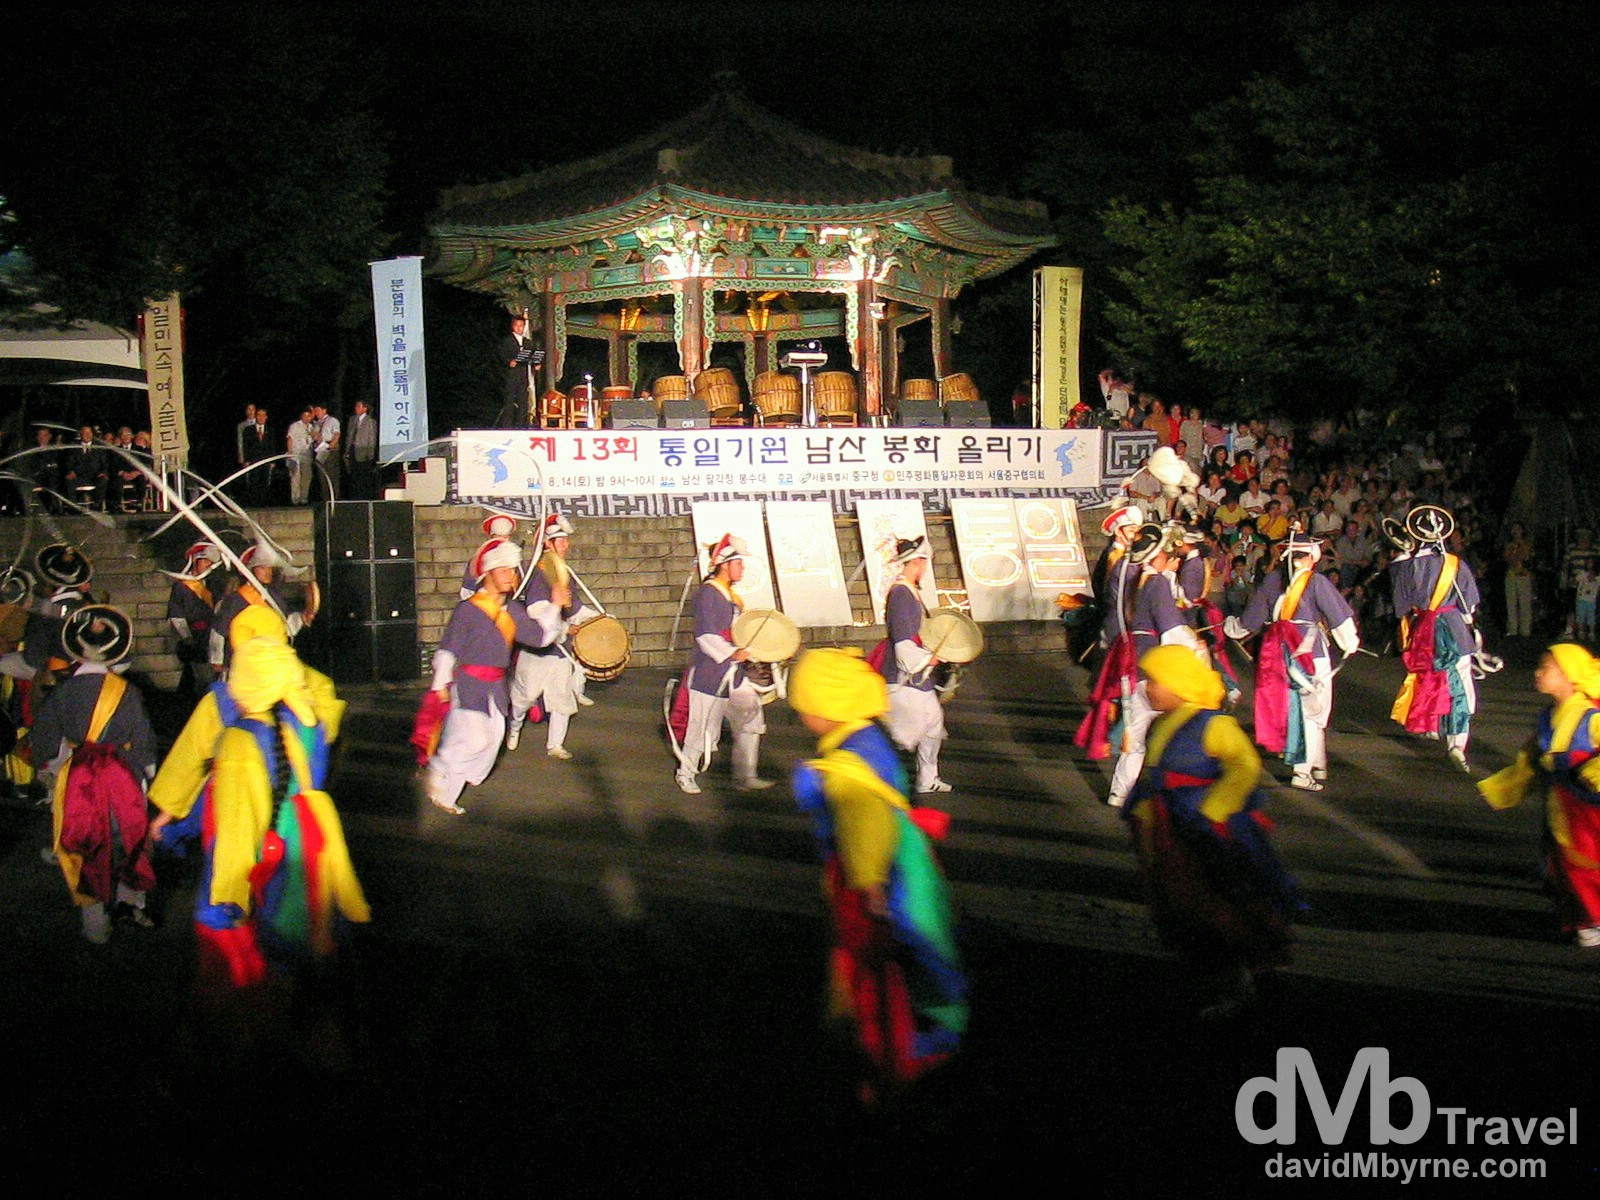 A traditional Farmers Dance in the grounds of Namsan Park in Seoul, South Korea. August 14th 2004 